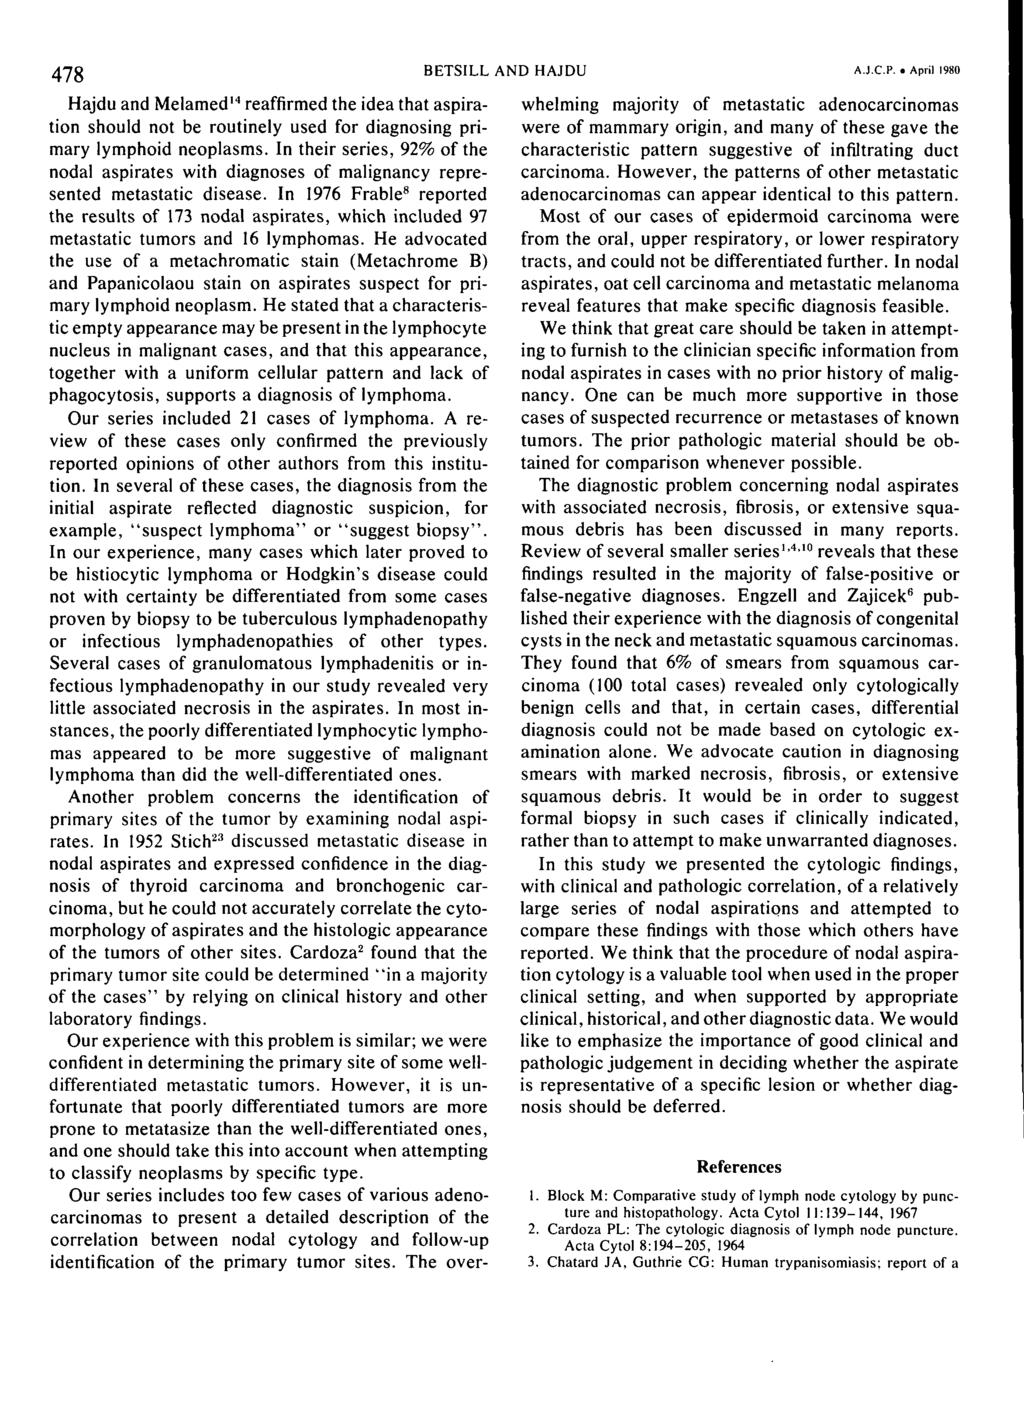 478 BETSILL AND HAJDU A.J.C.P. April 980 Hajdu and Melamed' 4 reaffirmed the idea that aspiration should not be routinely used for diagnosing primary lymphoid neoplasms.